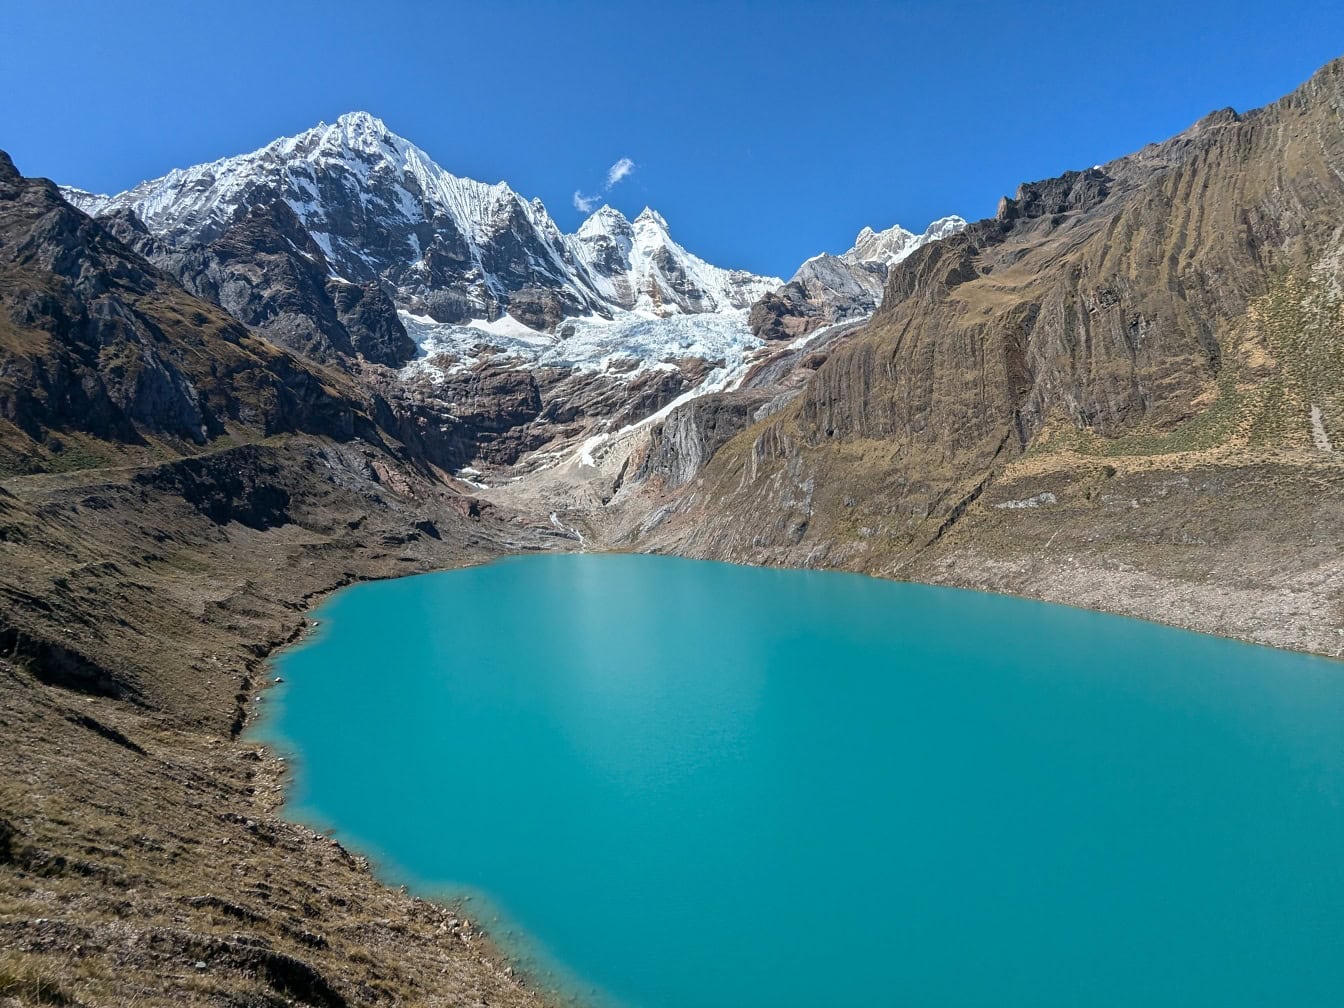 A scenic view of turquoise Llanguanco lake in natural park at Cordillera Huayhuash mountain range in the Andes in Peru